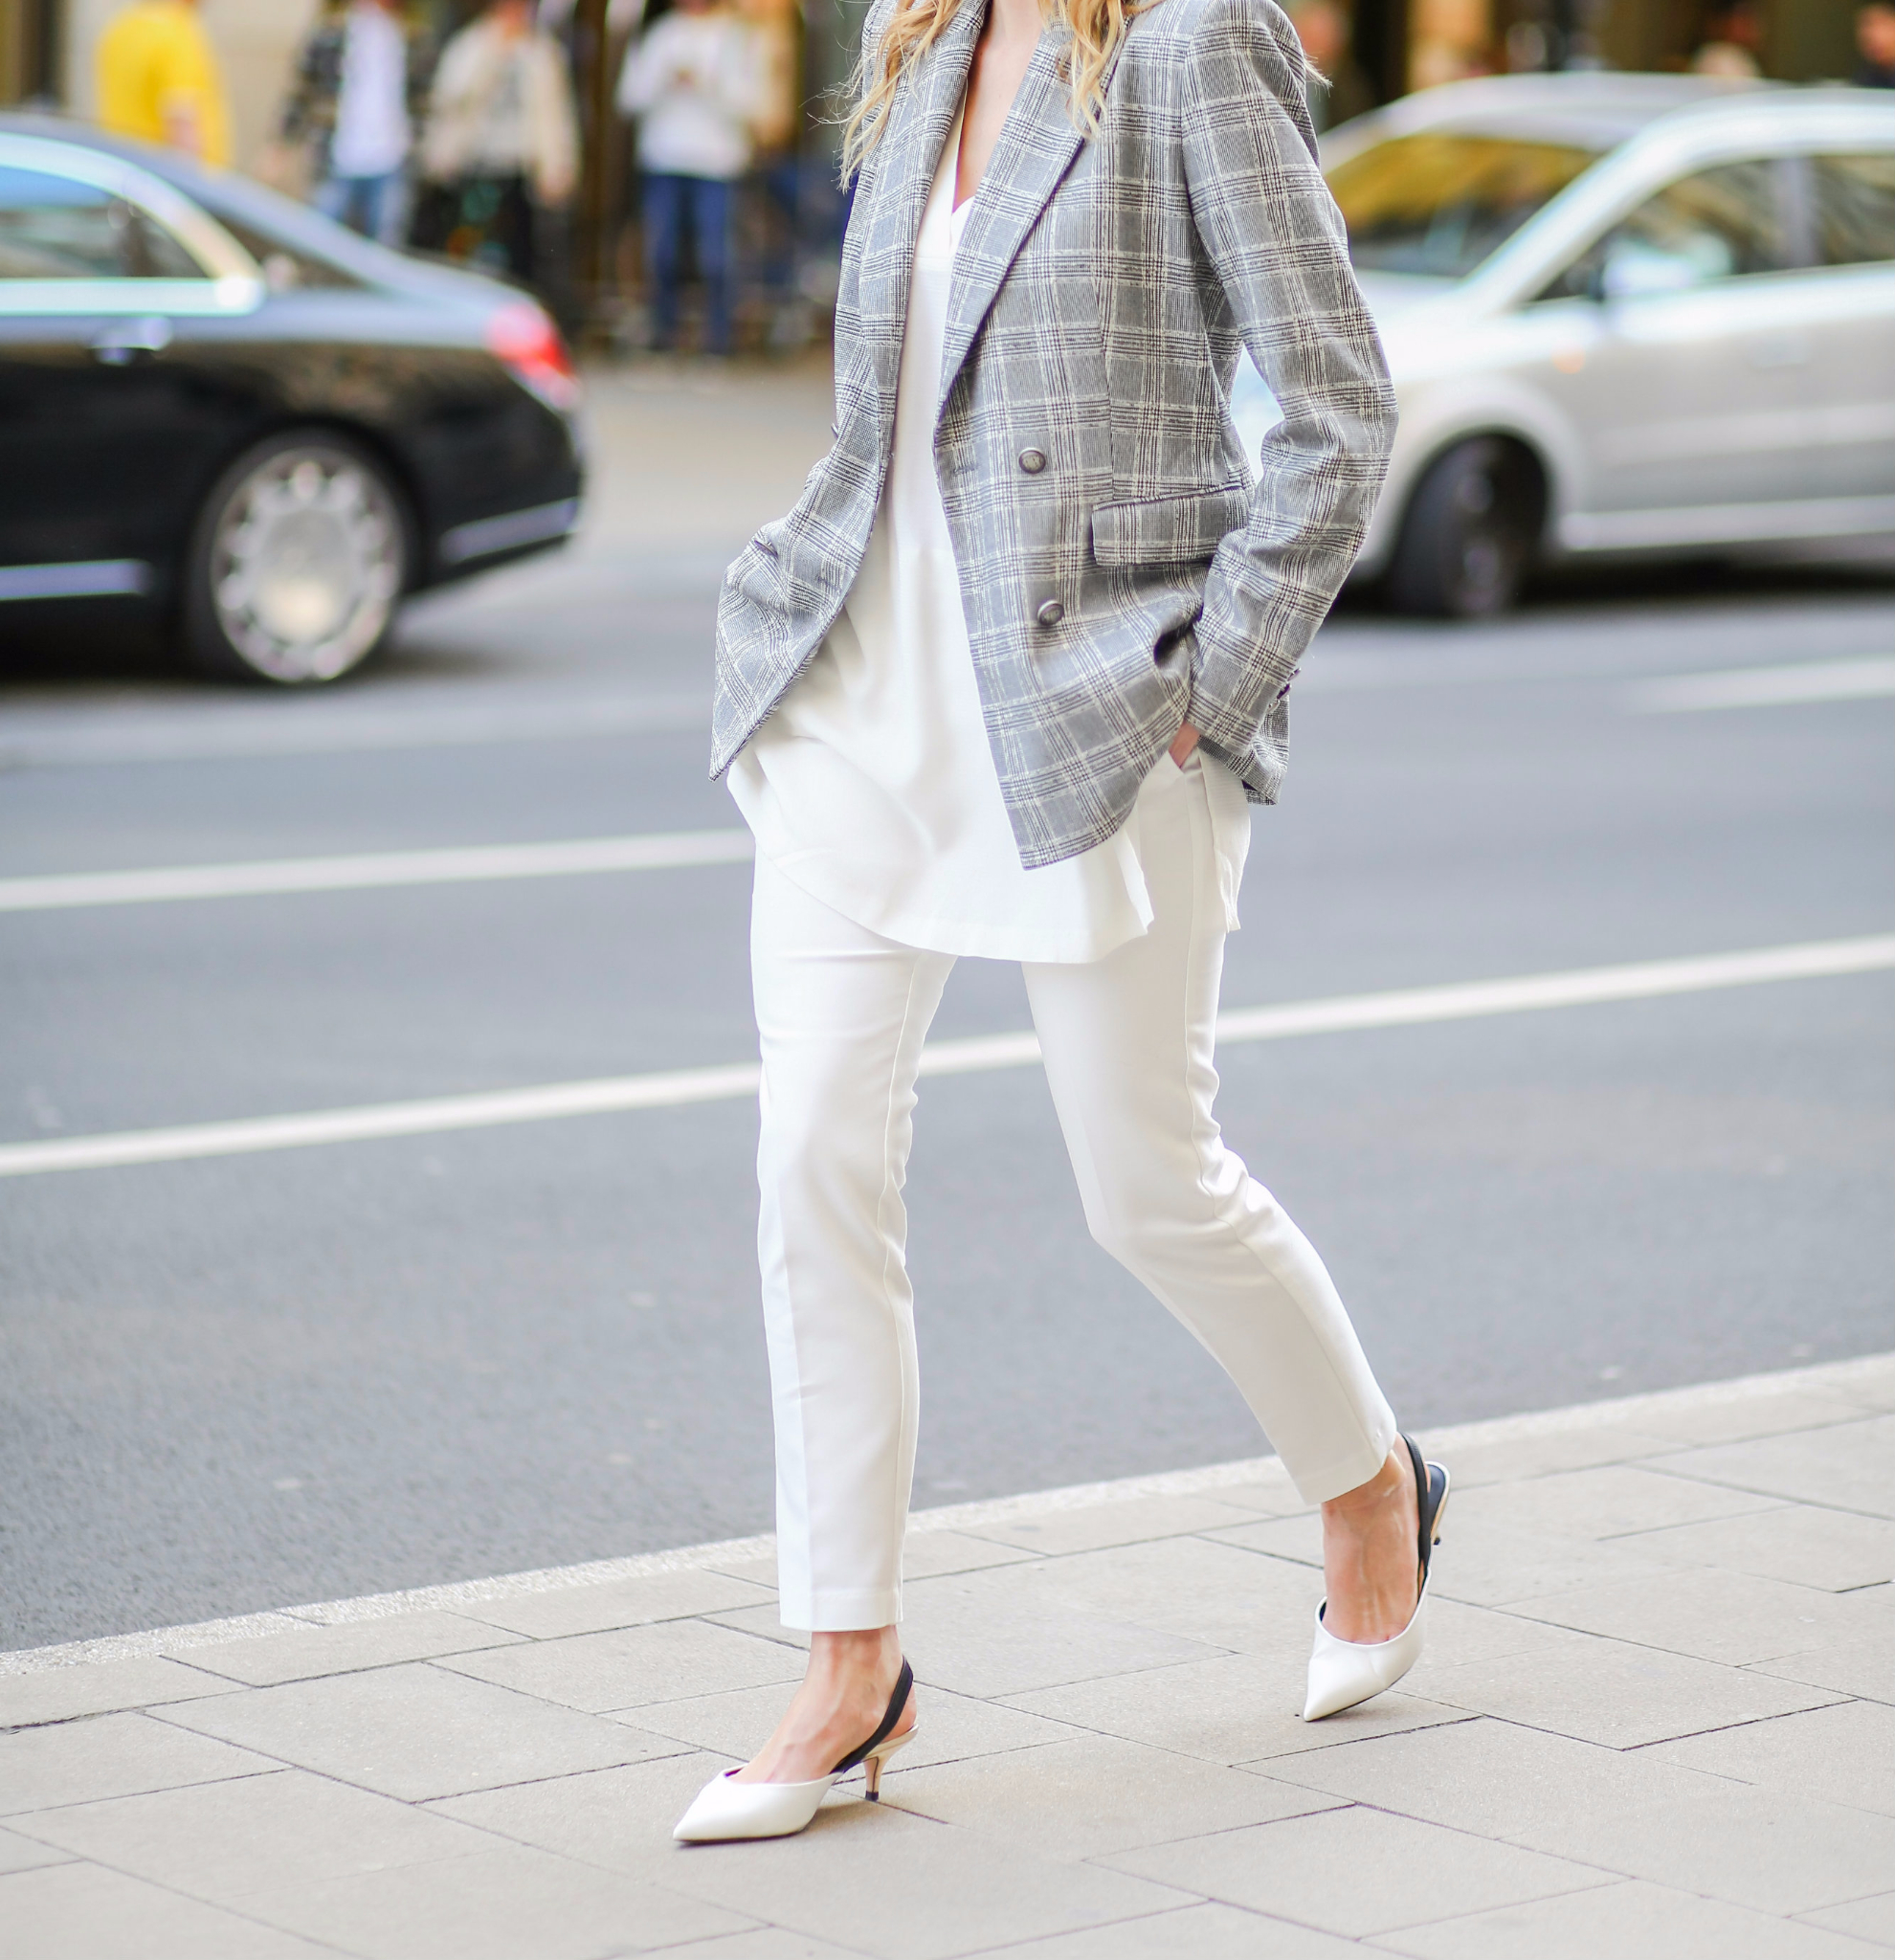 MOD-by-Monique-Fashion-Looks-White-and-checked-4-1